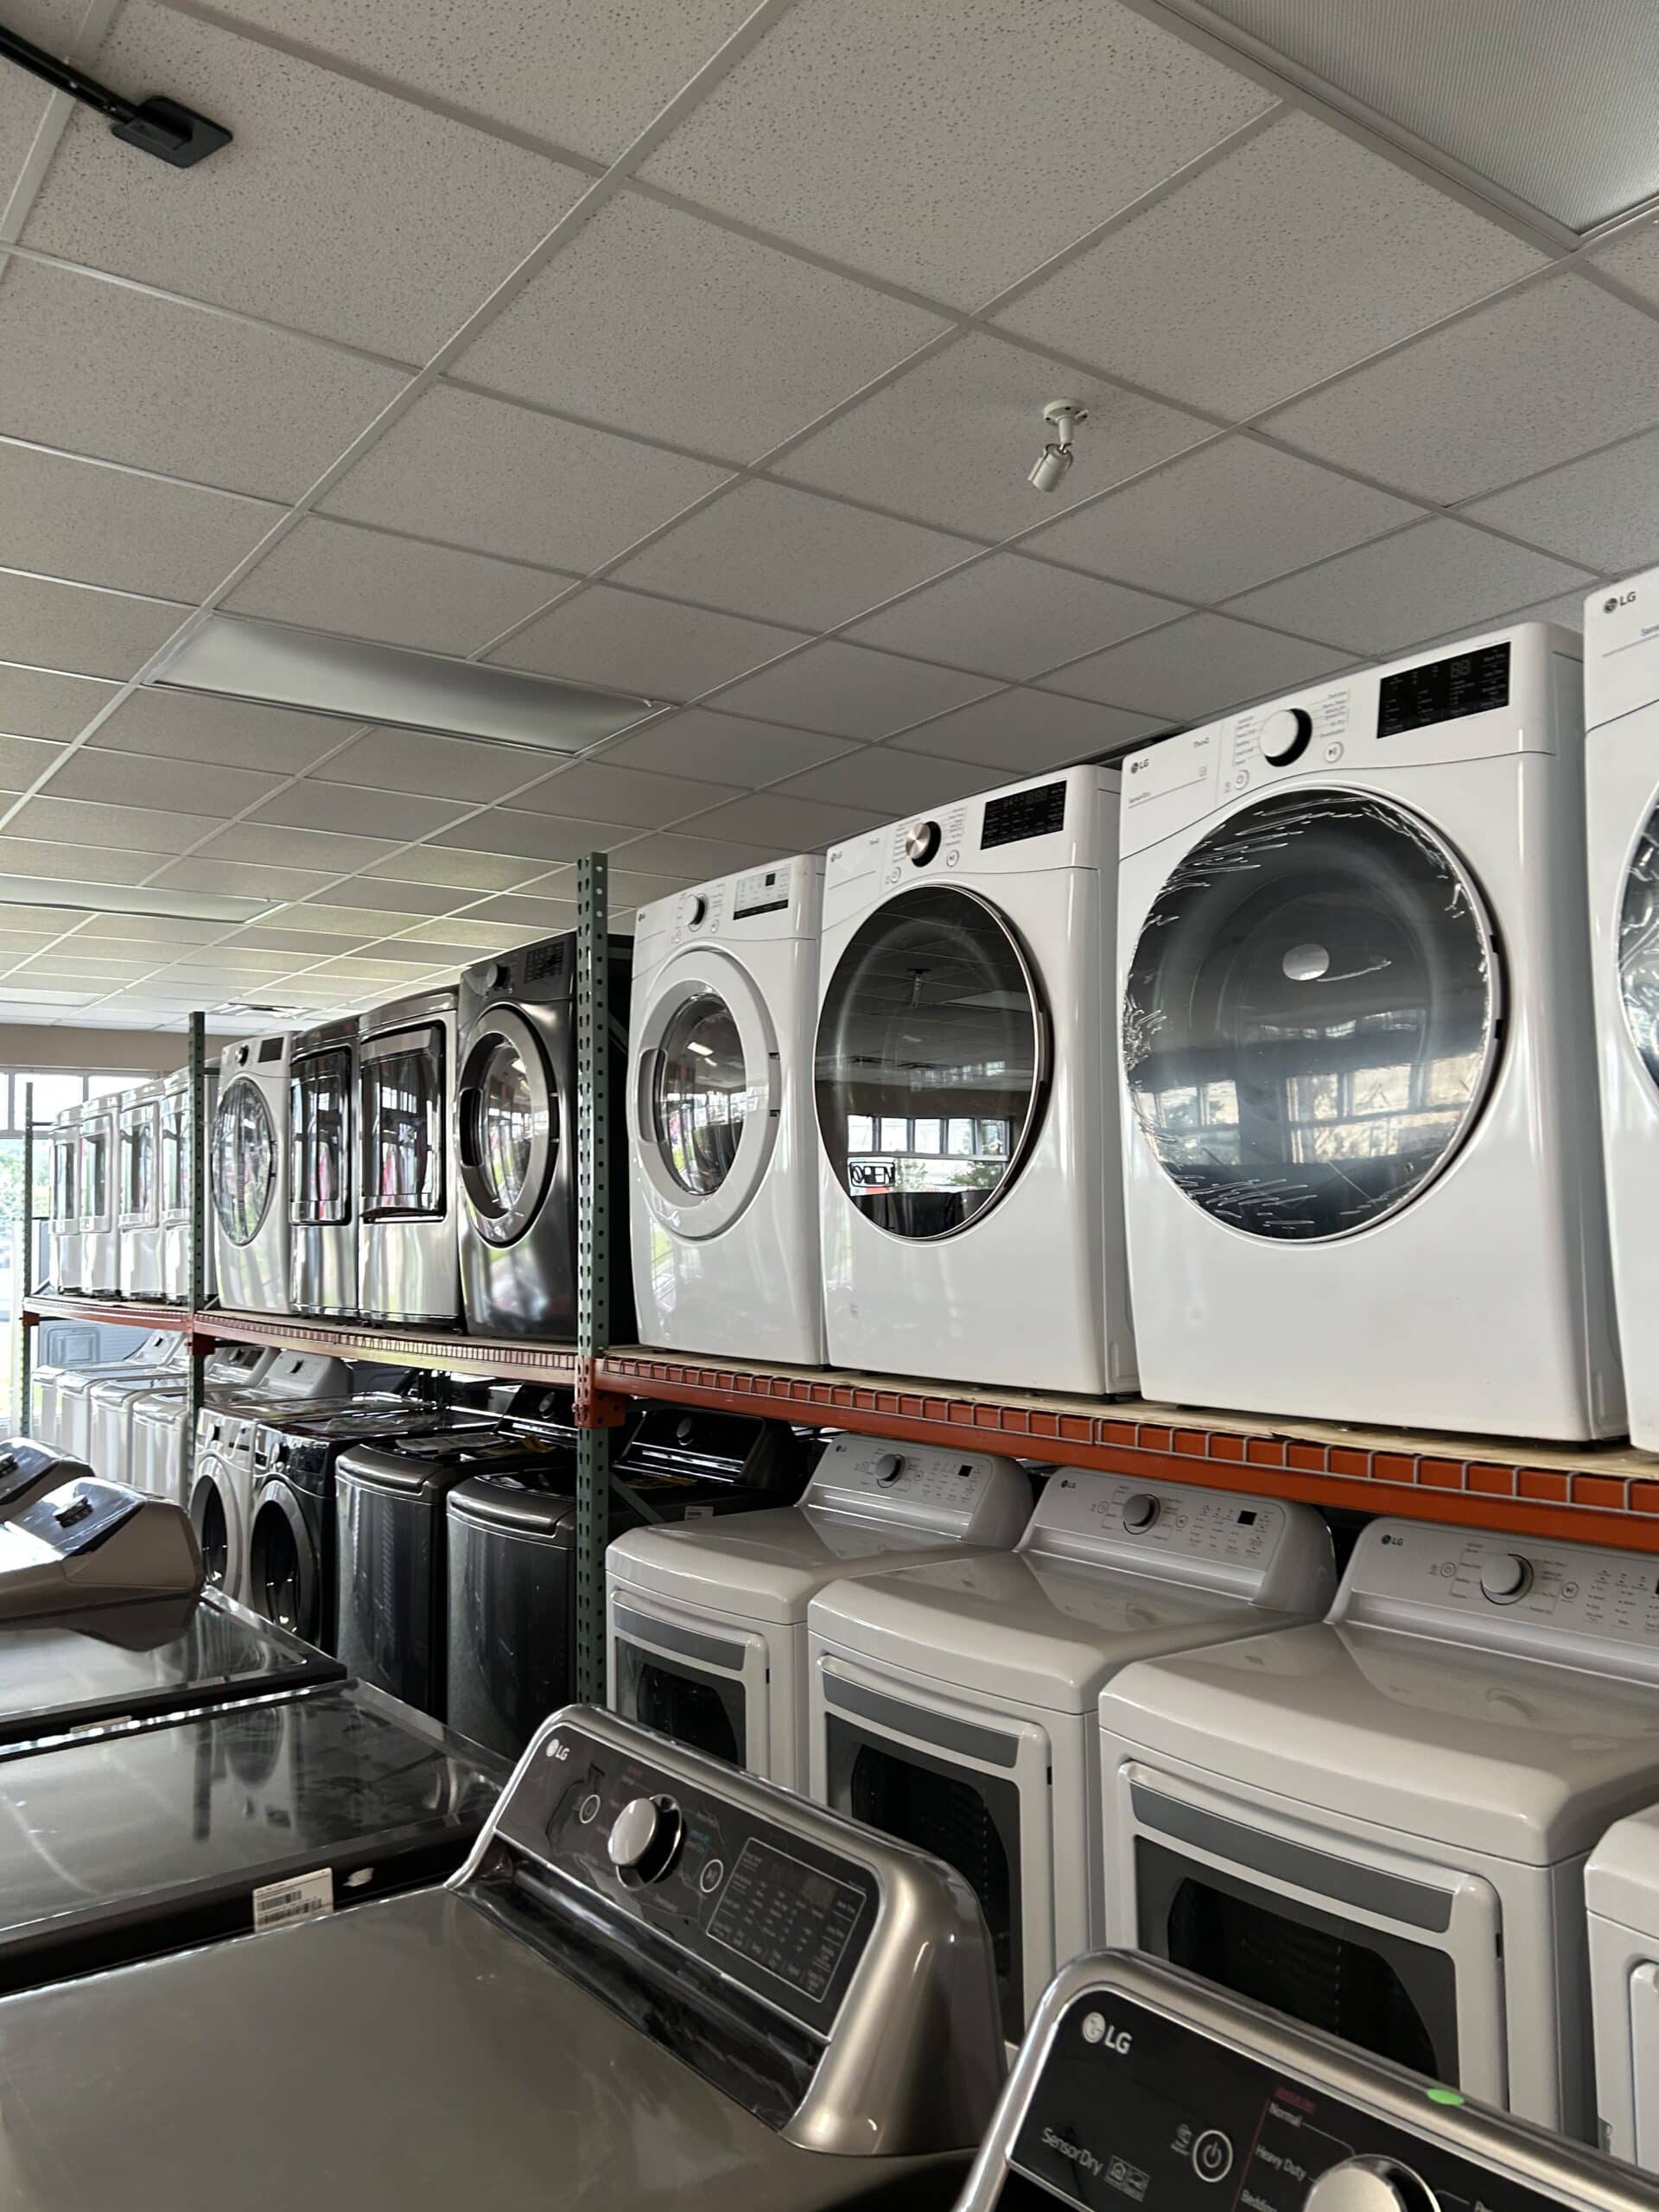 Top and bottom shelves of washers and dryers